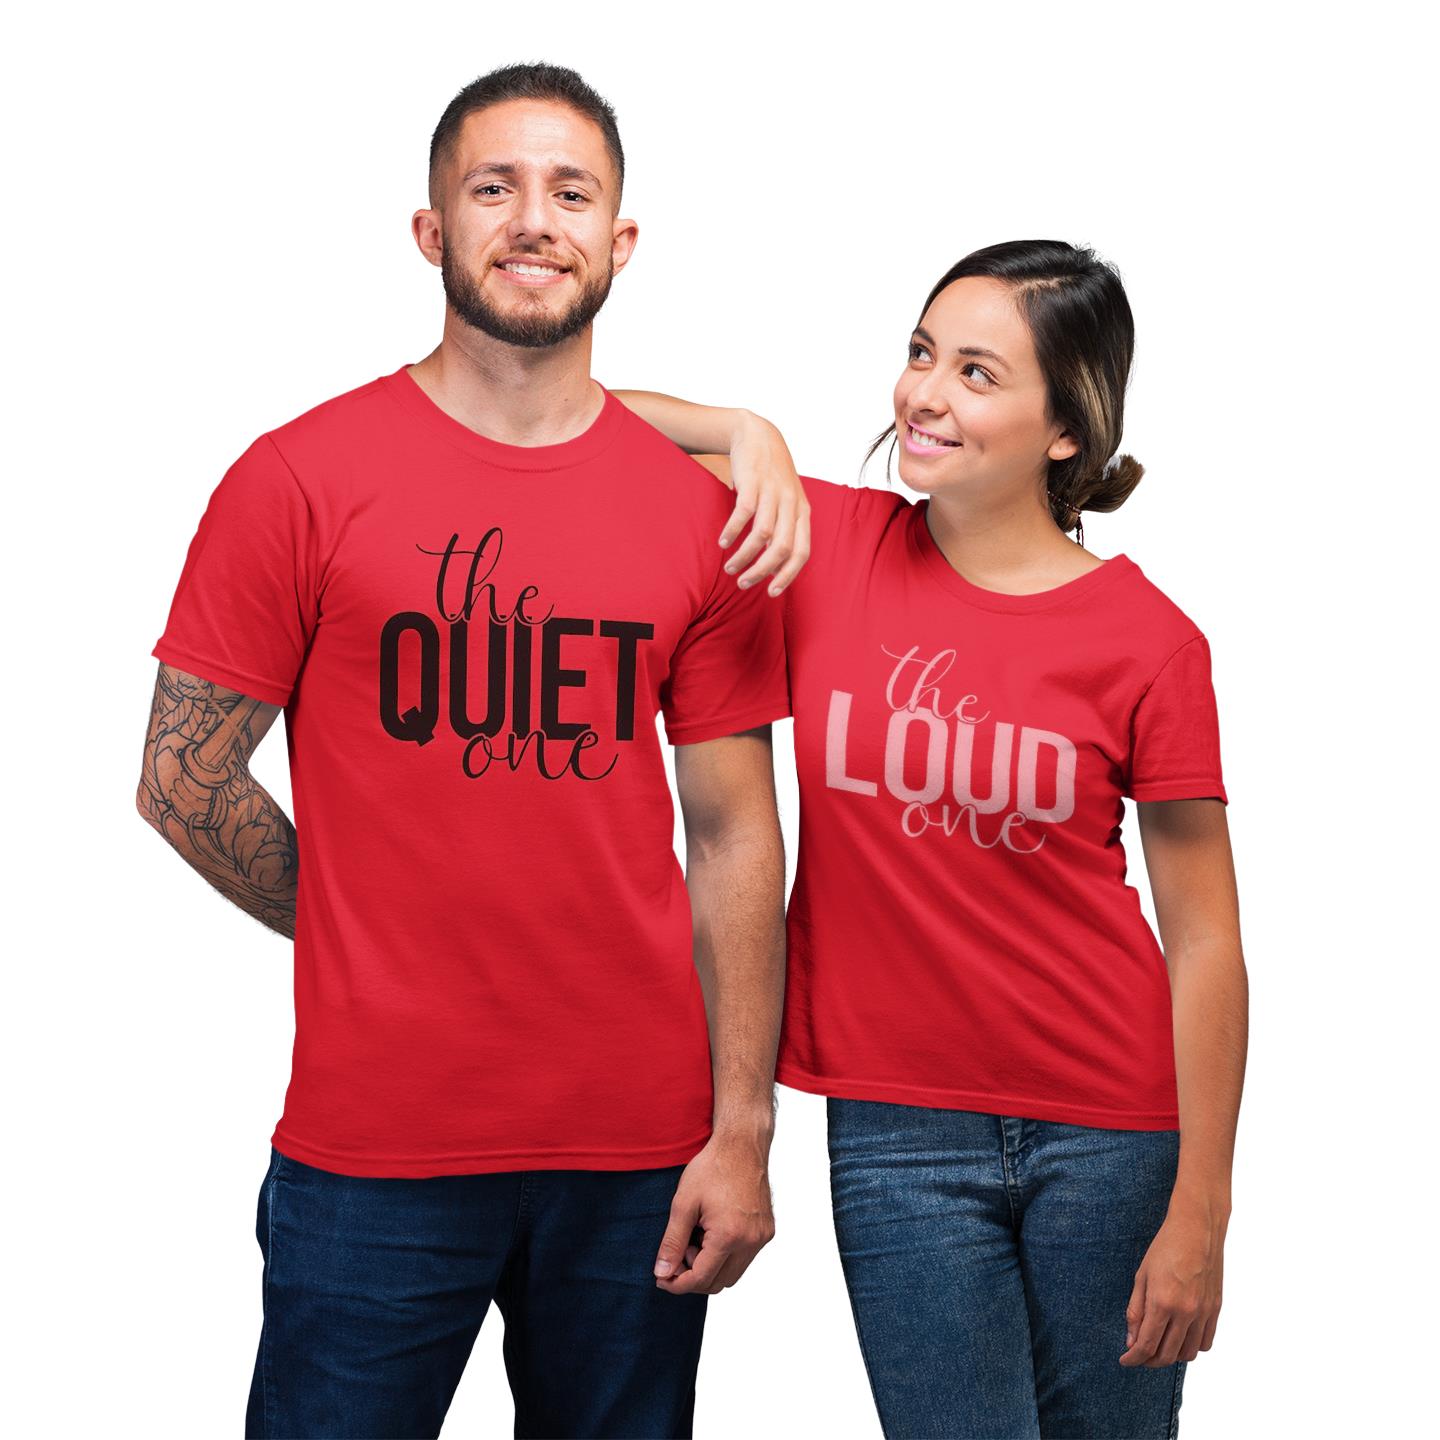 Funny The Quiet One And The Loud One Shirt For Couples Friend Matching T-shirt